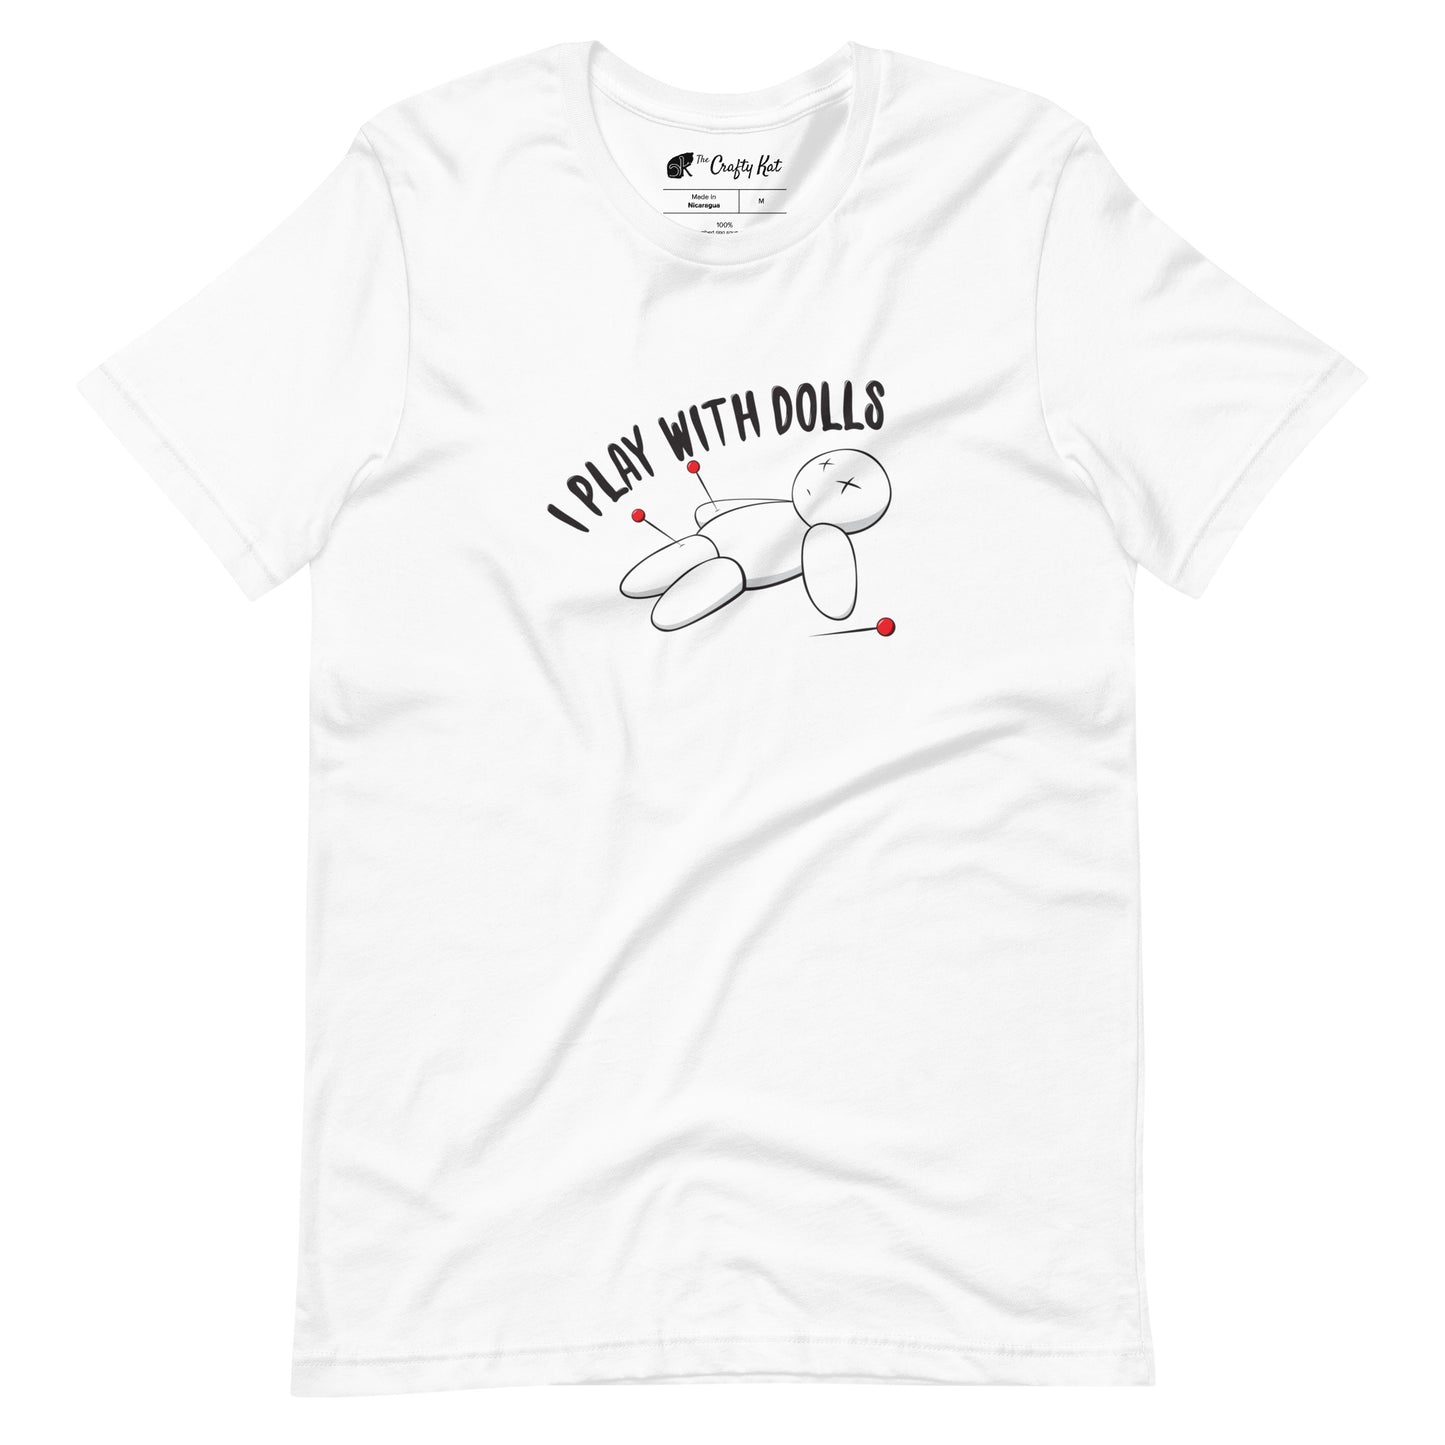 White t-shirt with graphic of white voodoo doll with Xs for eyes stuck with several pins and text "I PLAY WITH DOLLS"